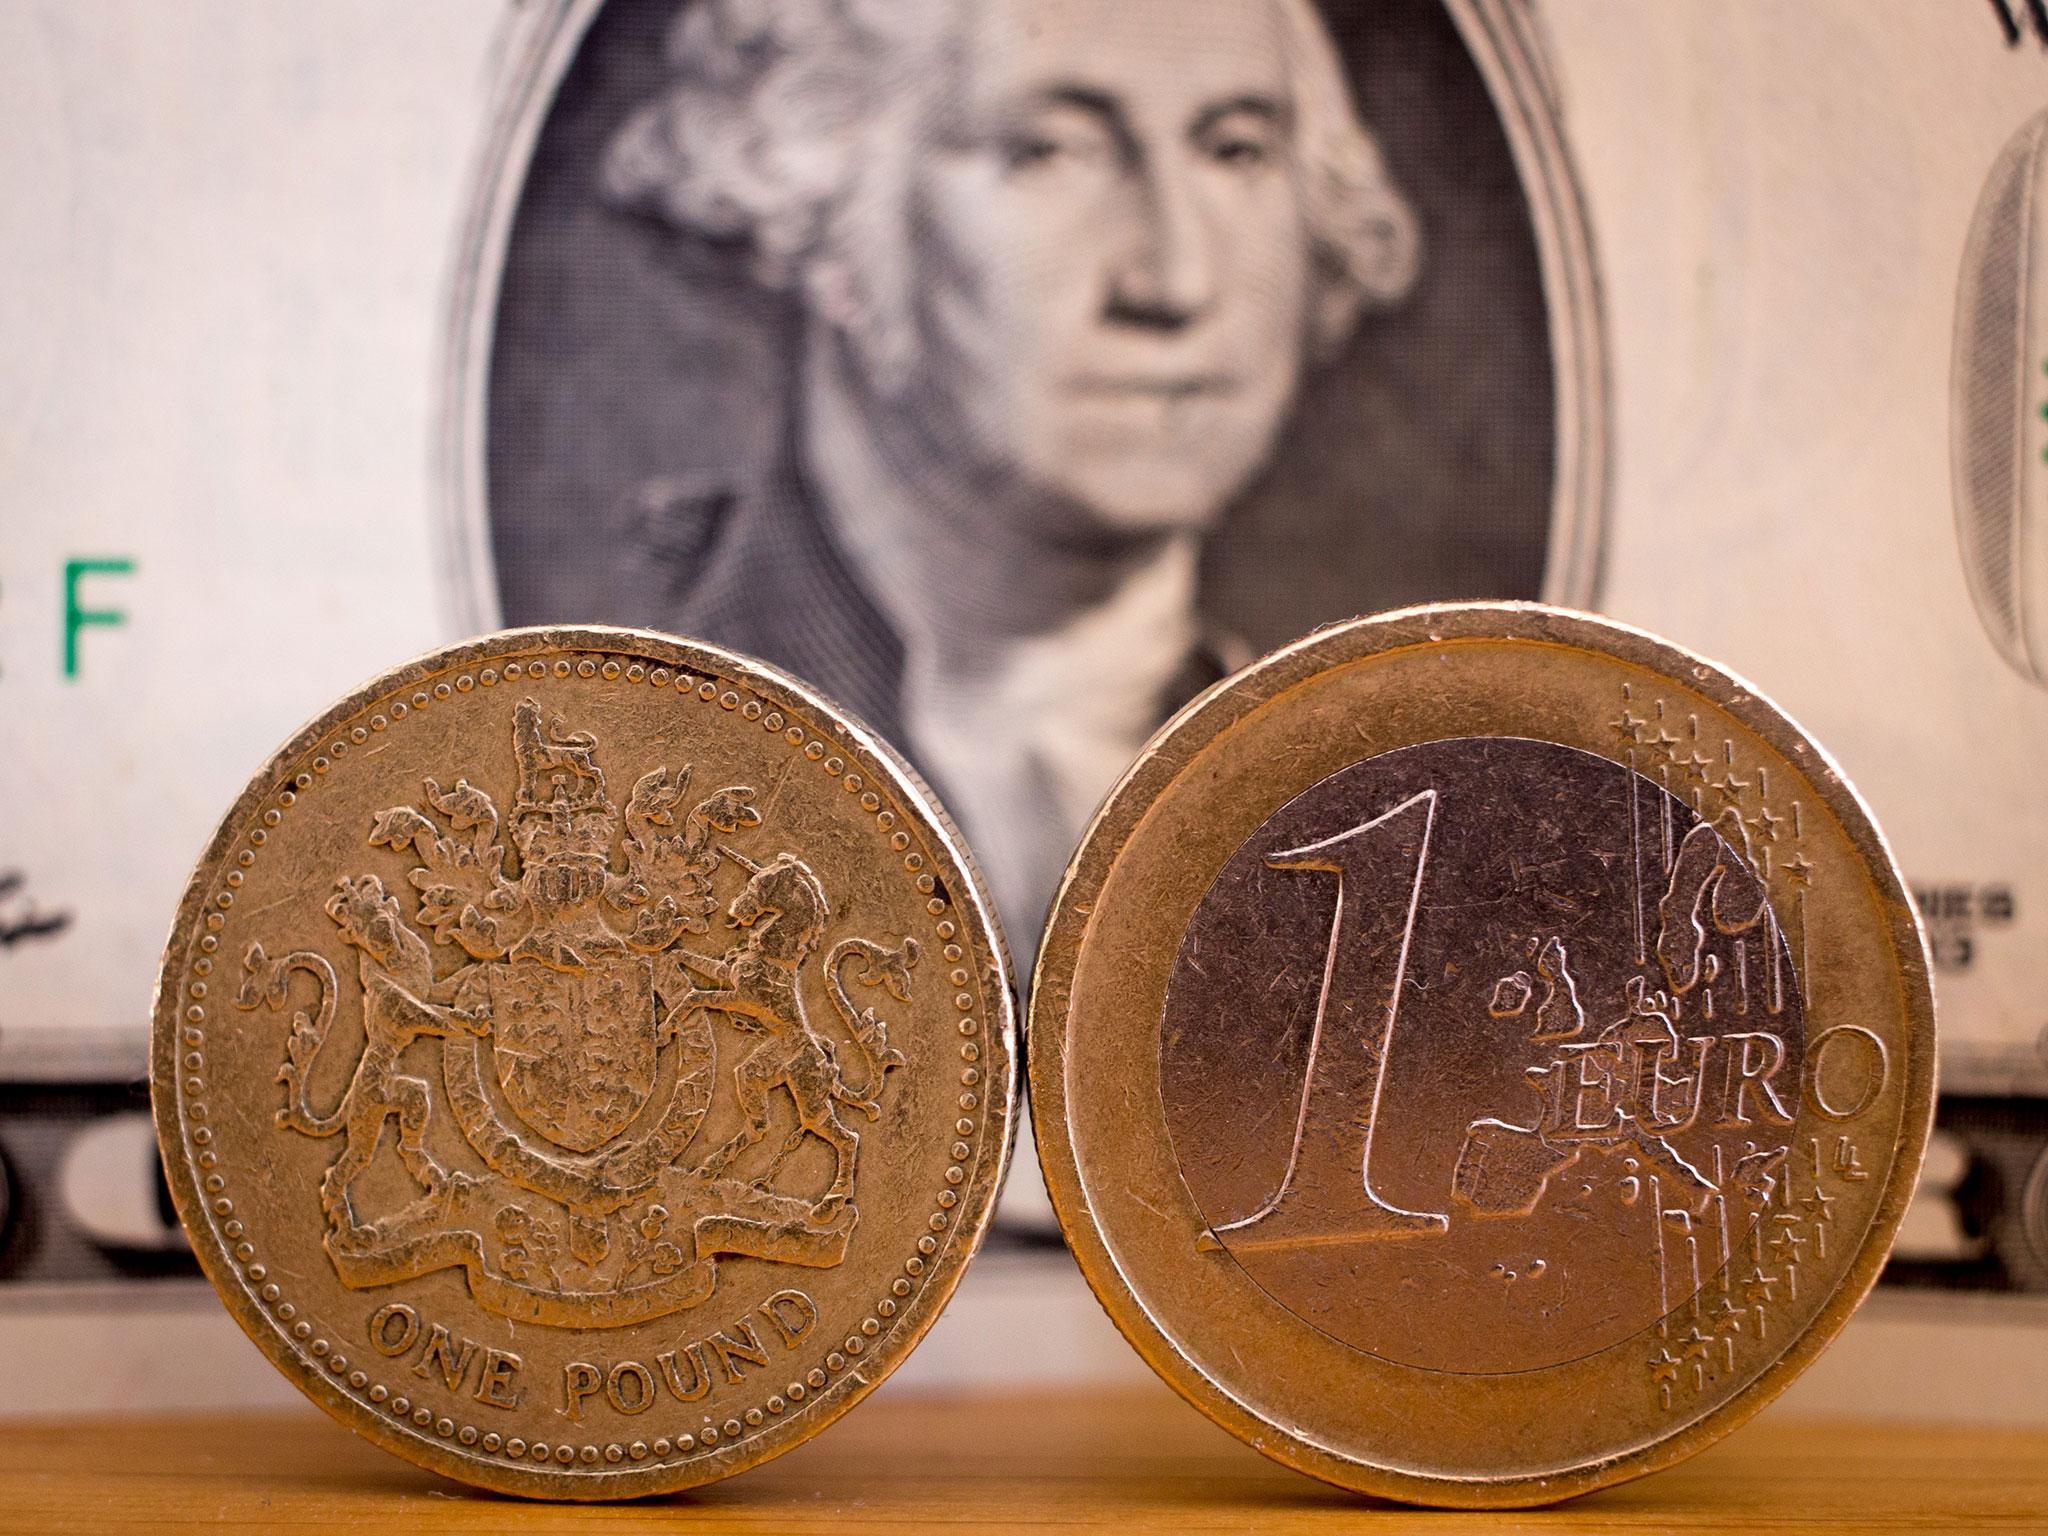 Most economists predict the pound will trade at $1.23 against the dollar by the end of June